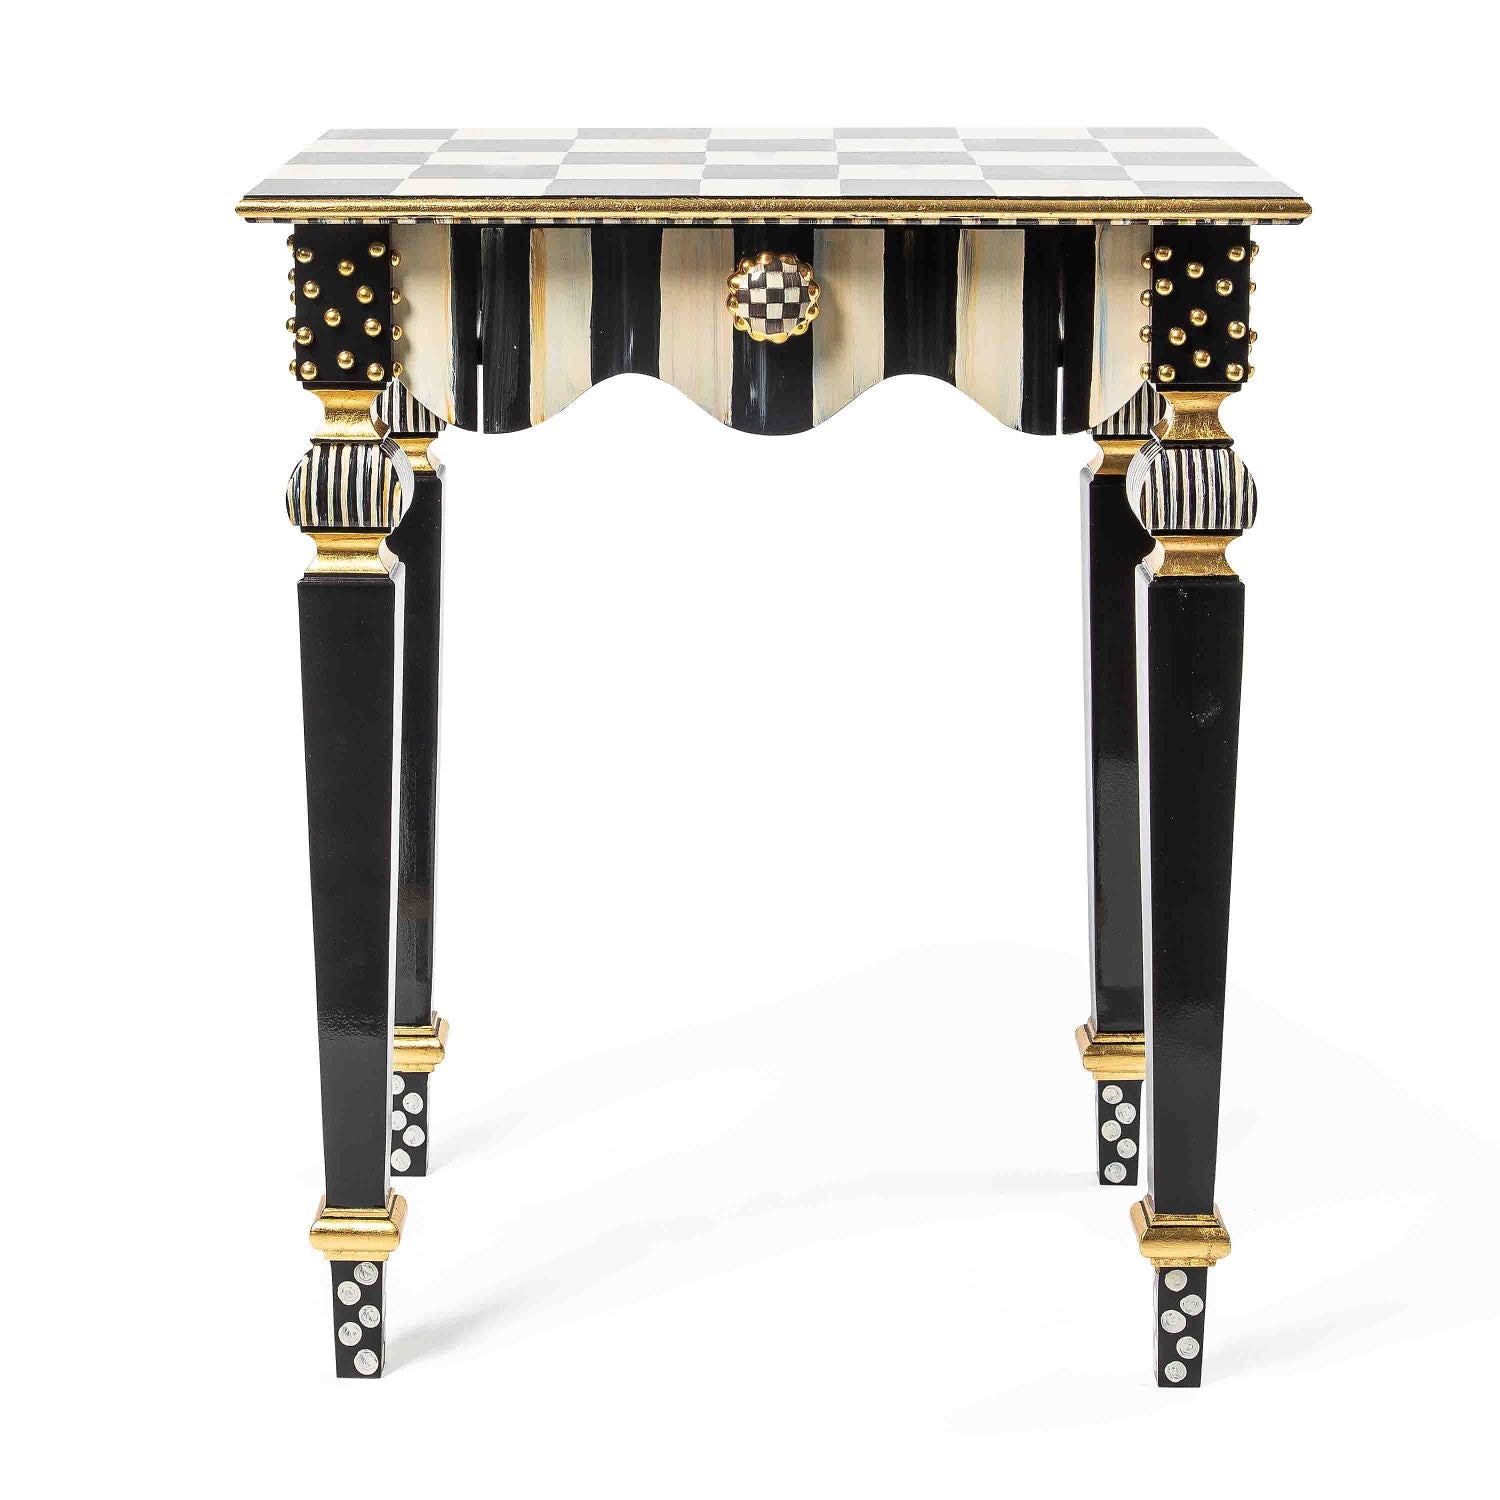 Courtly Stripe Side Table by Mackenzie-Childs - |VESIMI Design|